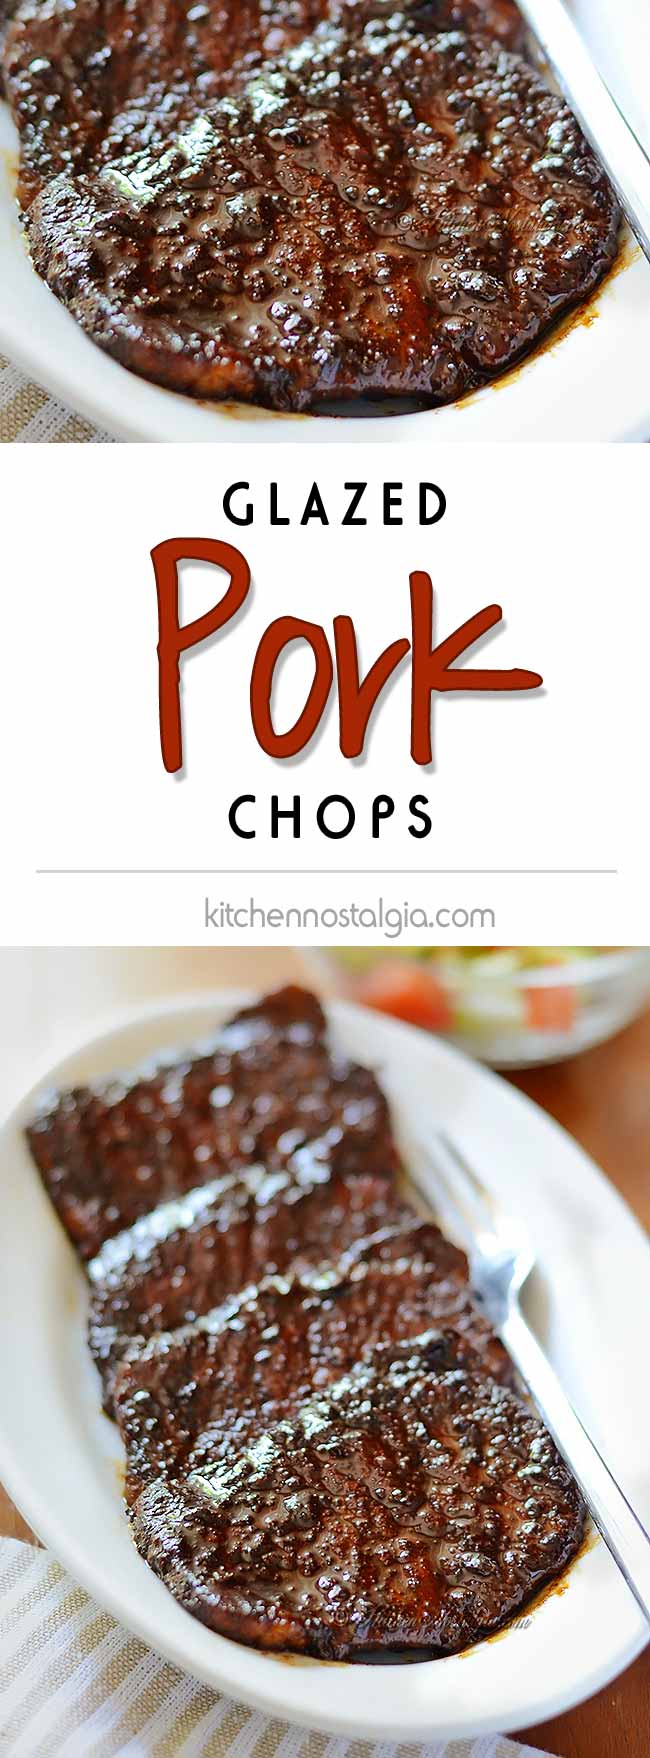 Balsamic Glazed Boneless Pork Loin Chops - dark caramelized sweet and sour marinade, grilled or fried in a skillet, they can be served at any party or family dinner